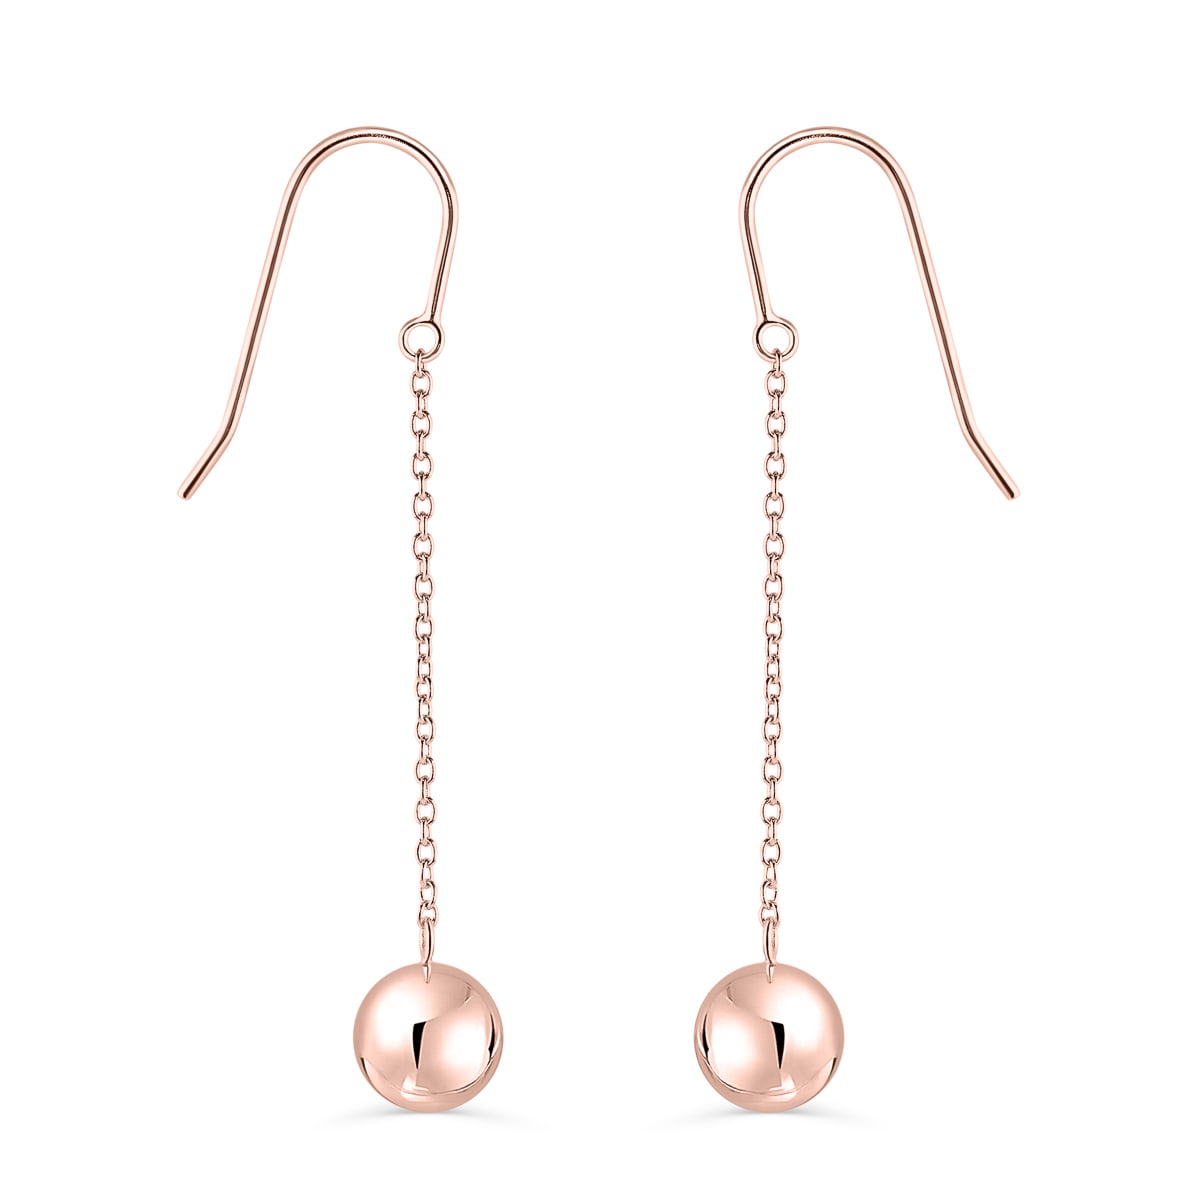 the alicia rose gold earrings